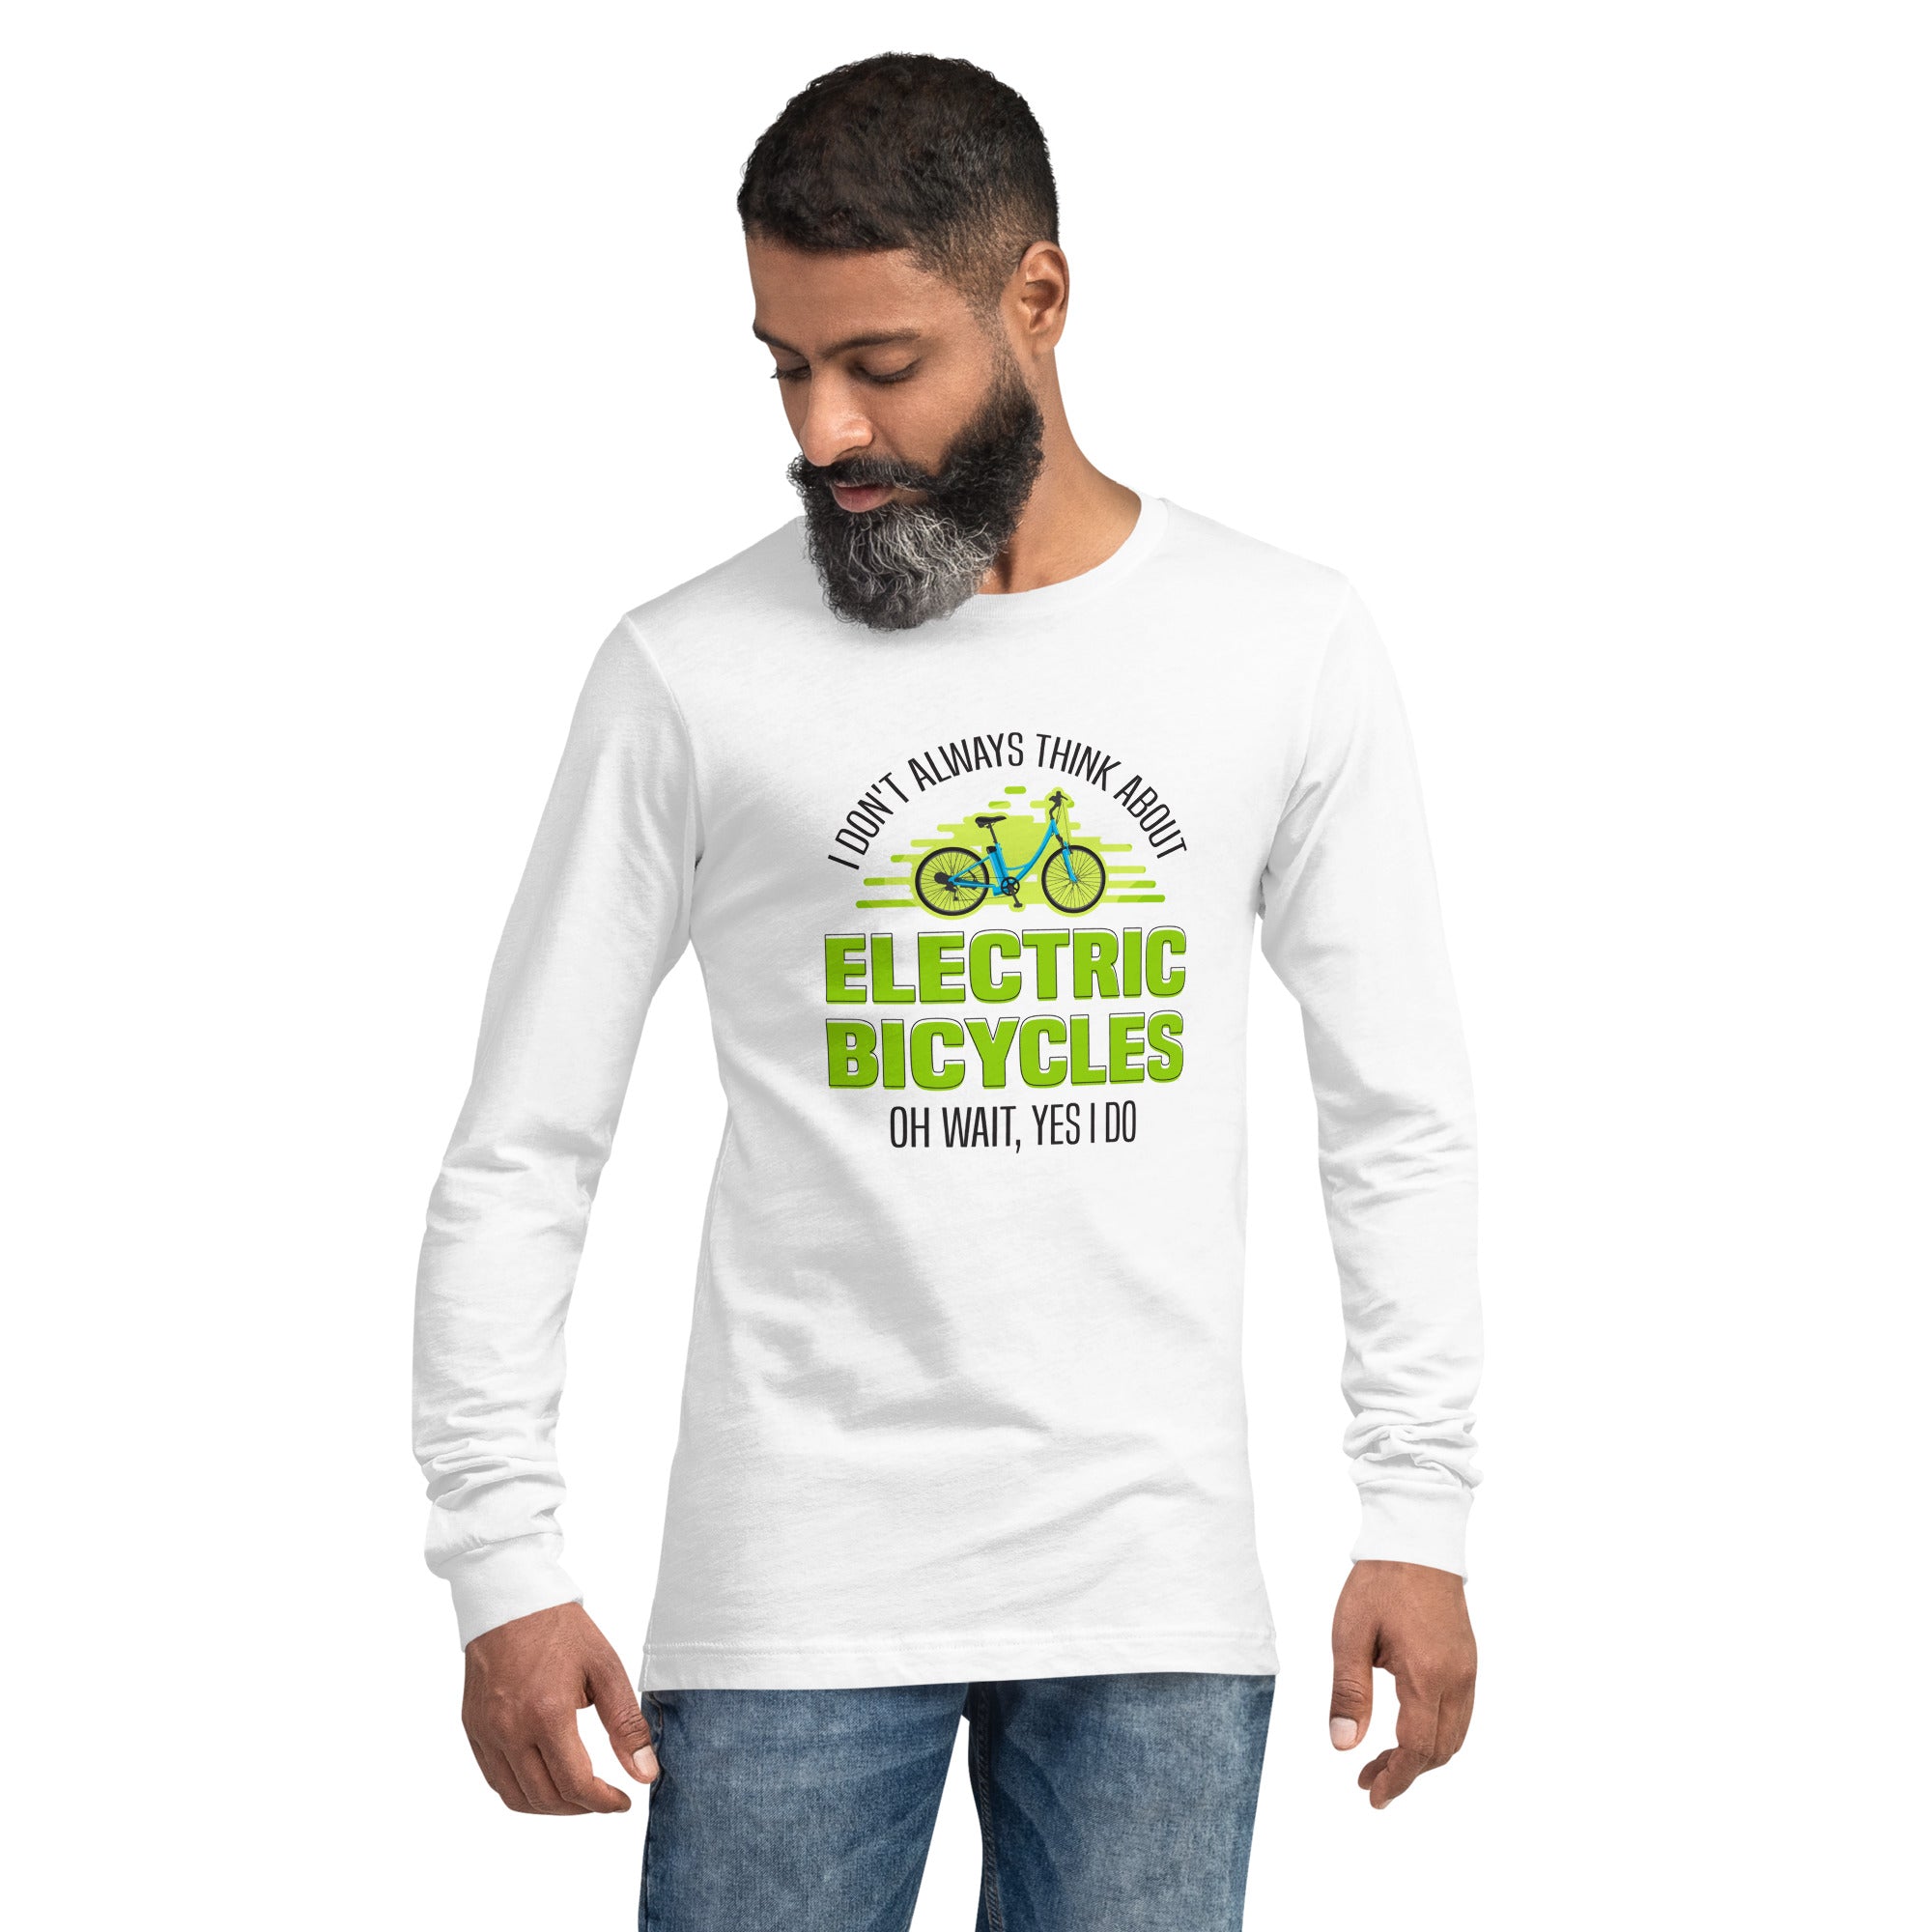 I Don't Always Think About Electric Bicycles Oh Wait, Yes I Do Men's Tank Top Bella + Canvas 3501 Men's Long Sleeve Shirt White